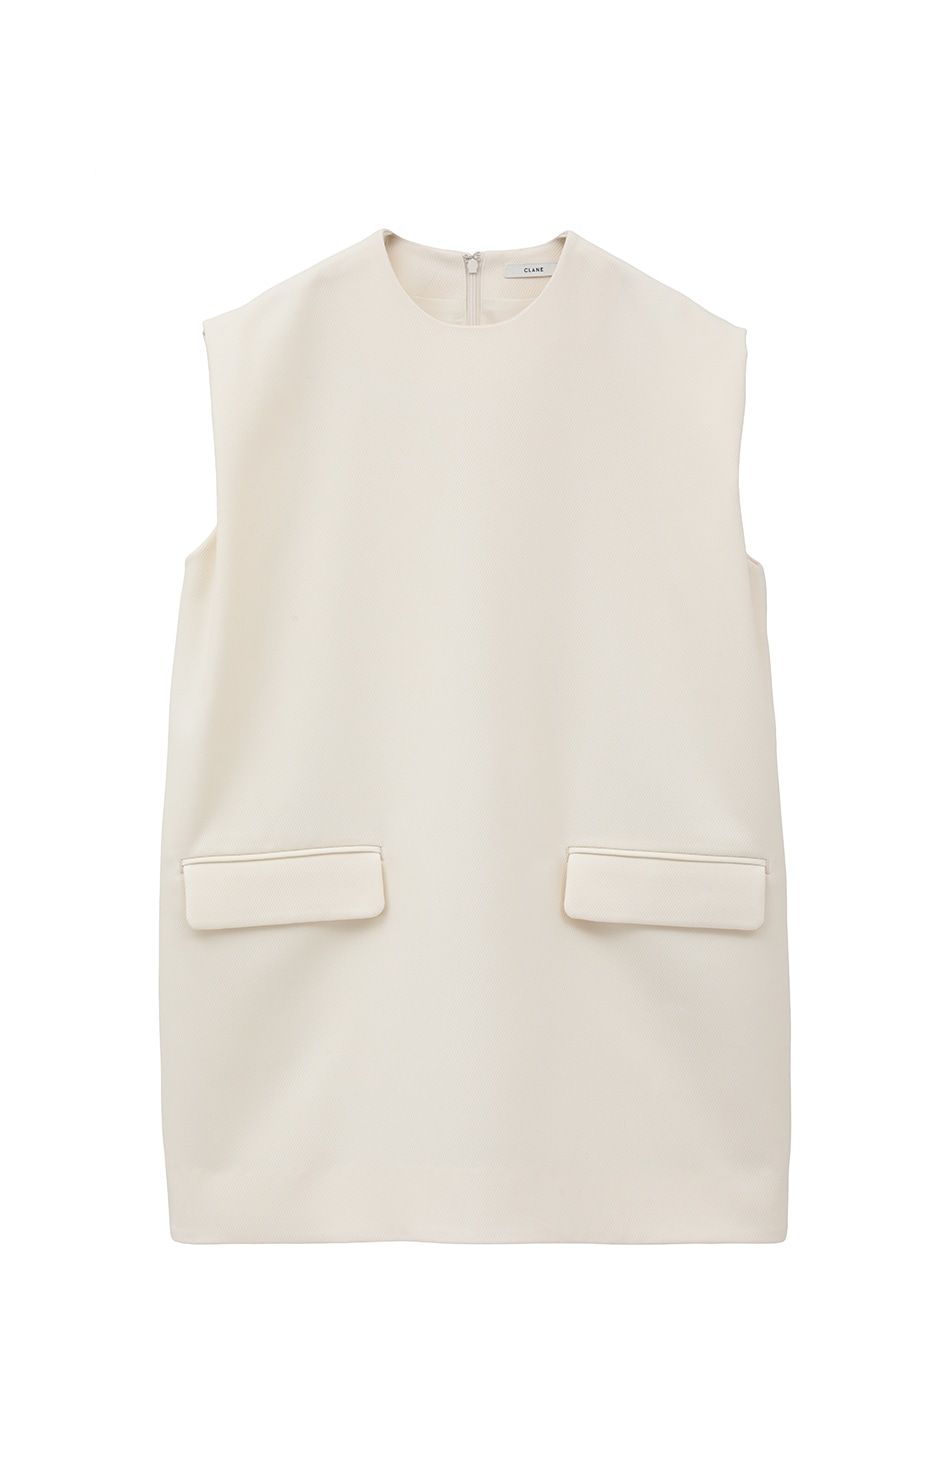 CLANE - ノースリーブ ロングトップス - SLEEVELESS LONG COCOON TOPS ...